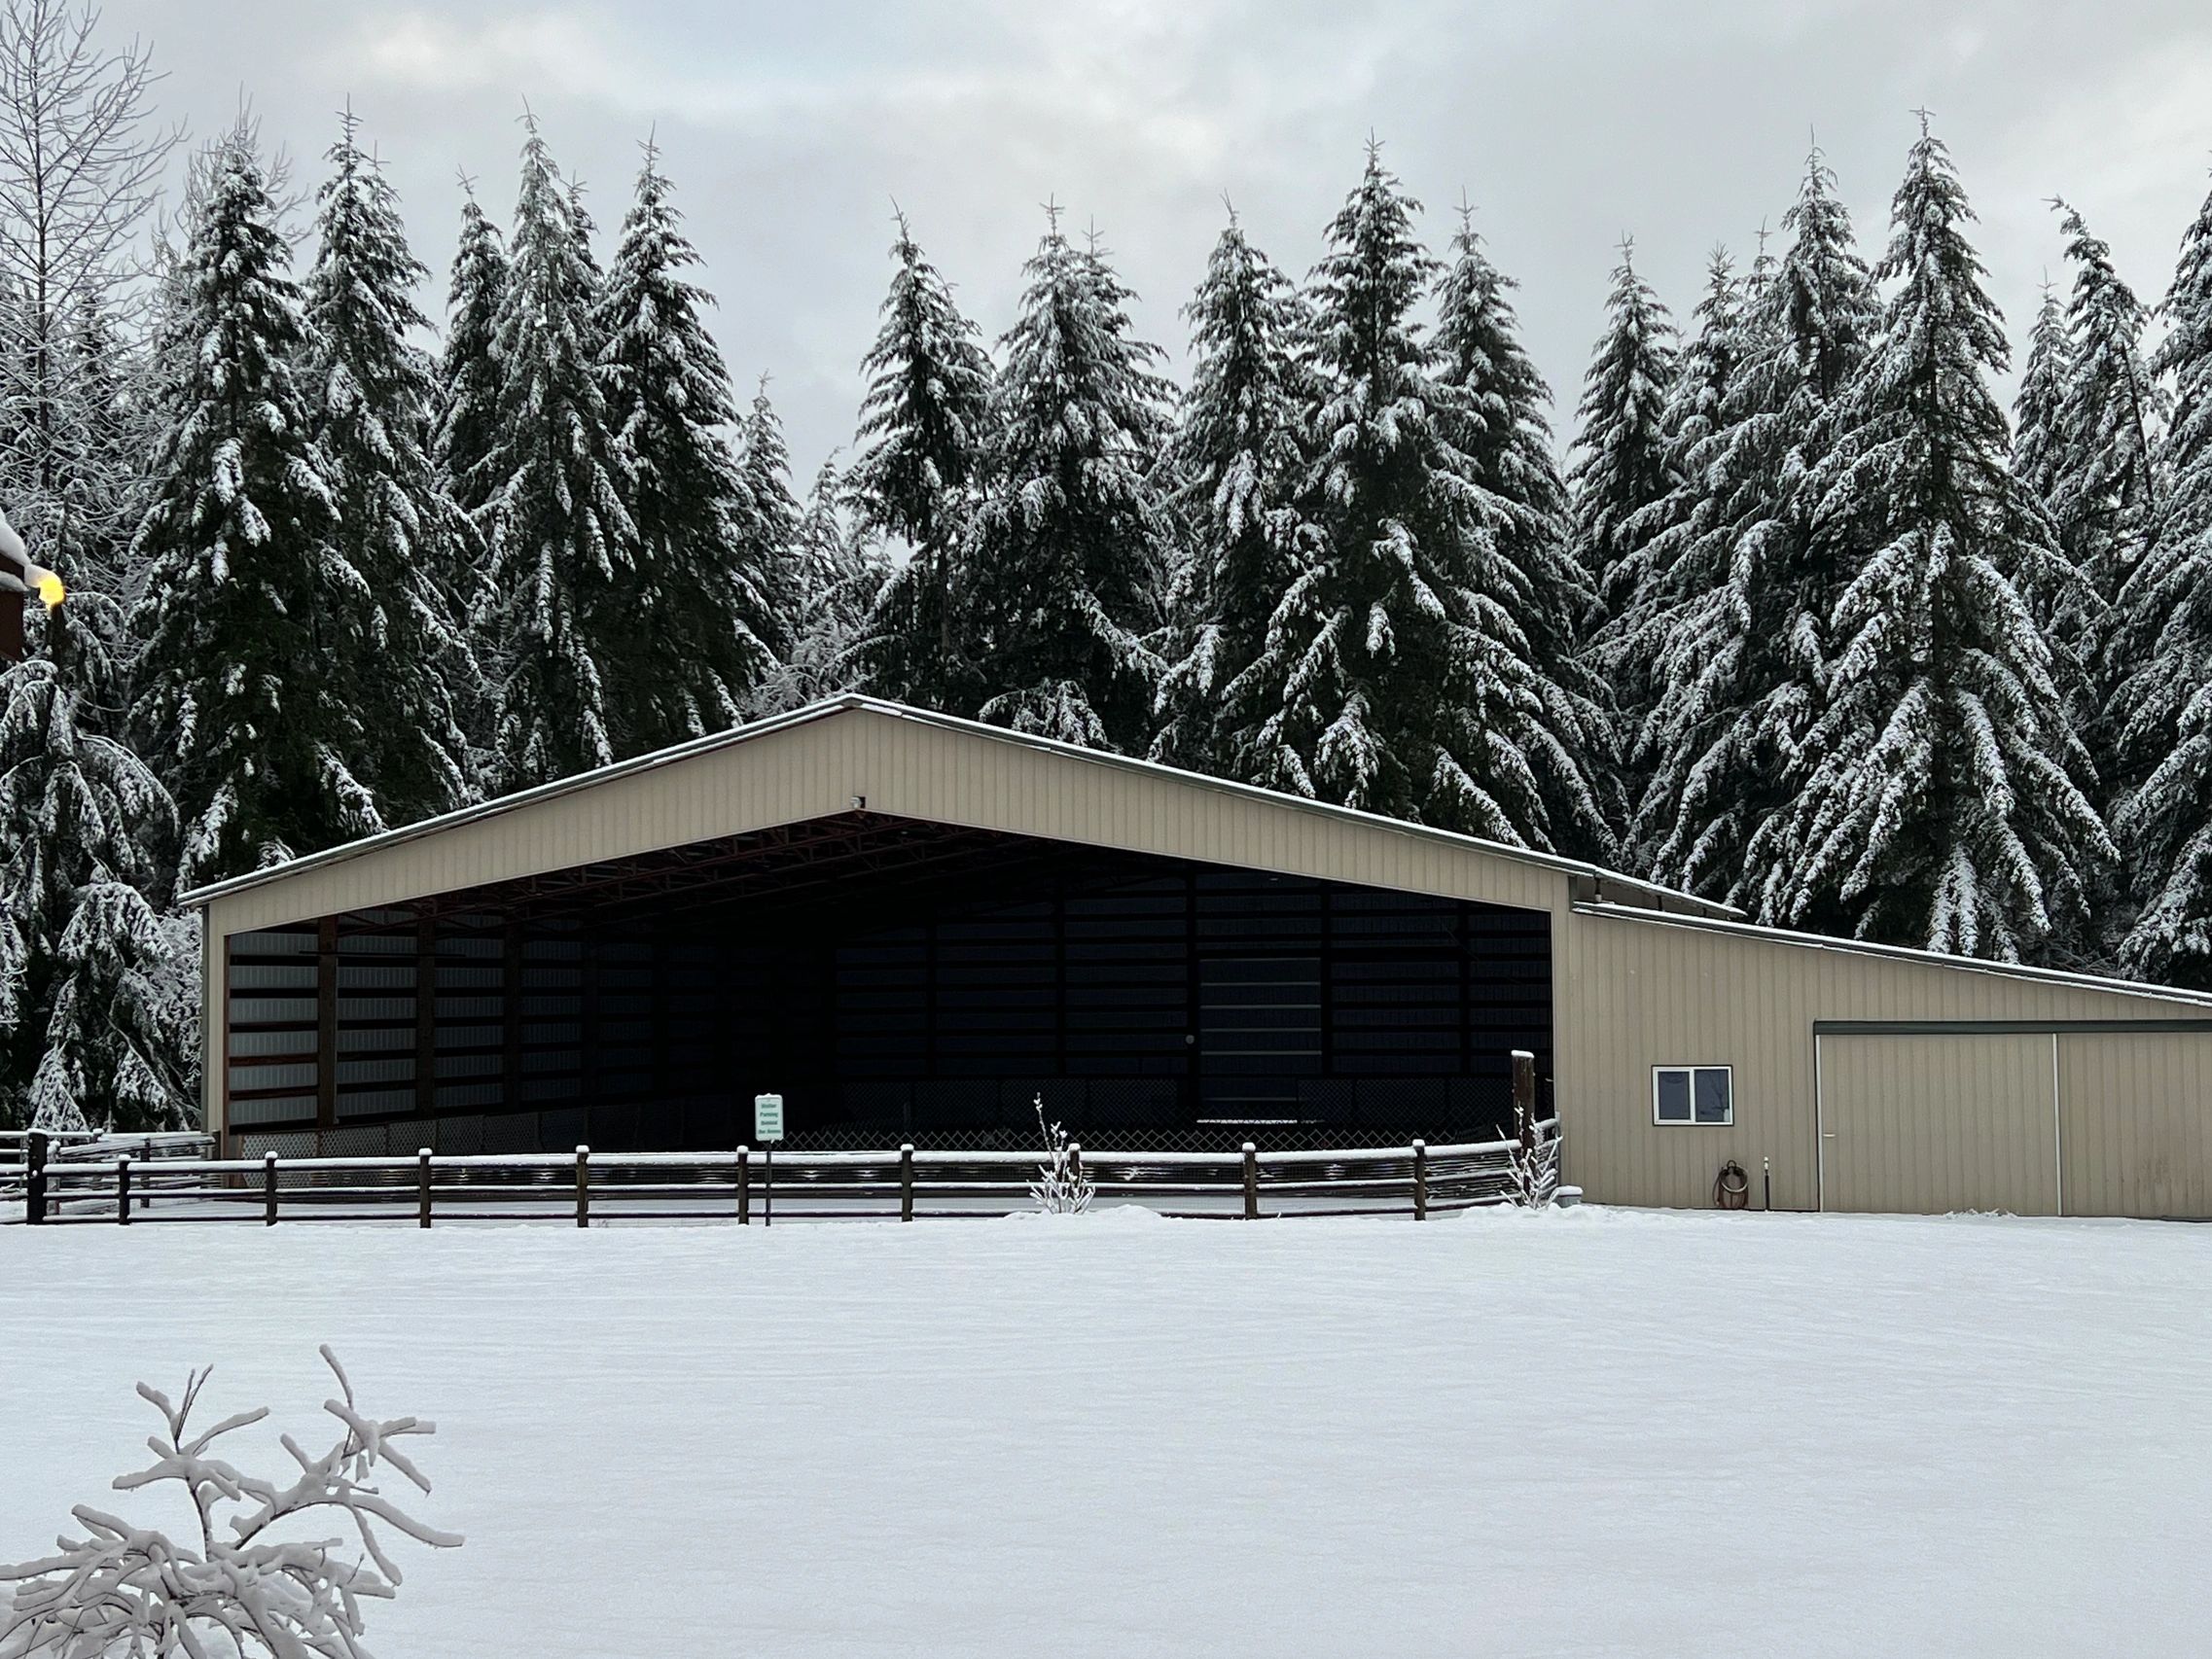 Training facility in the snow with tall trees